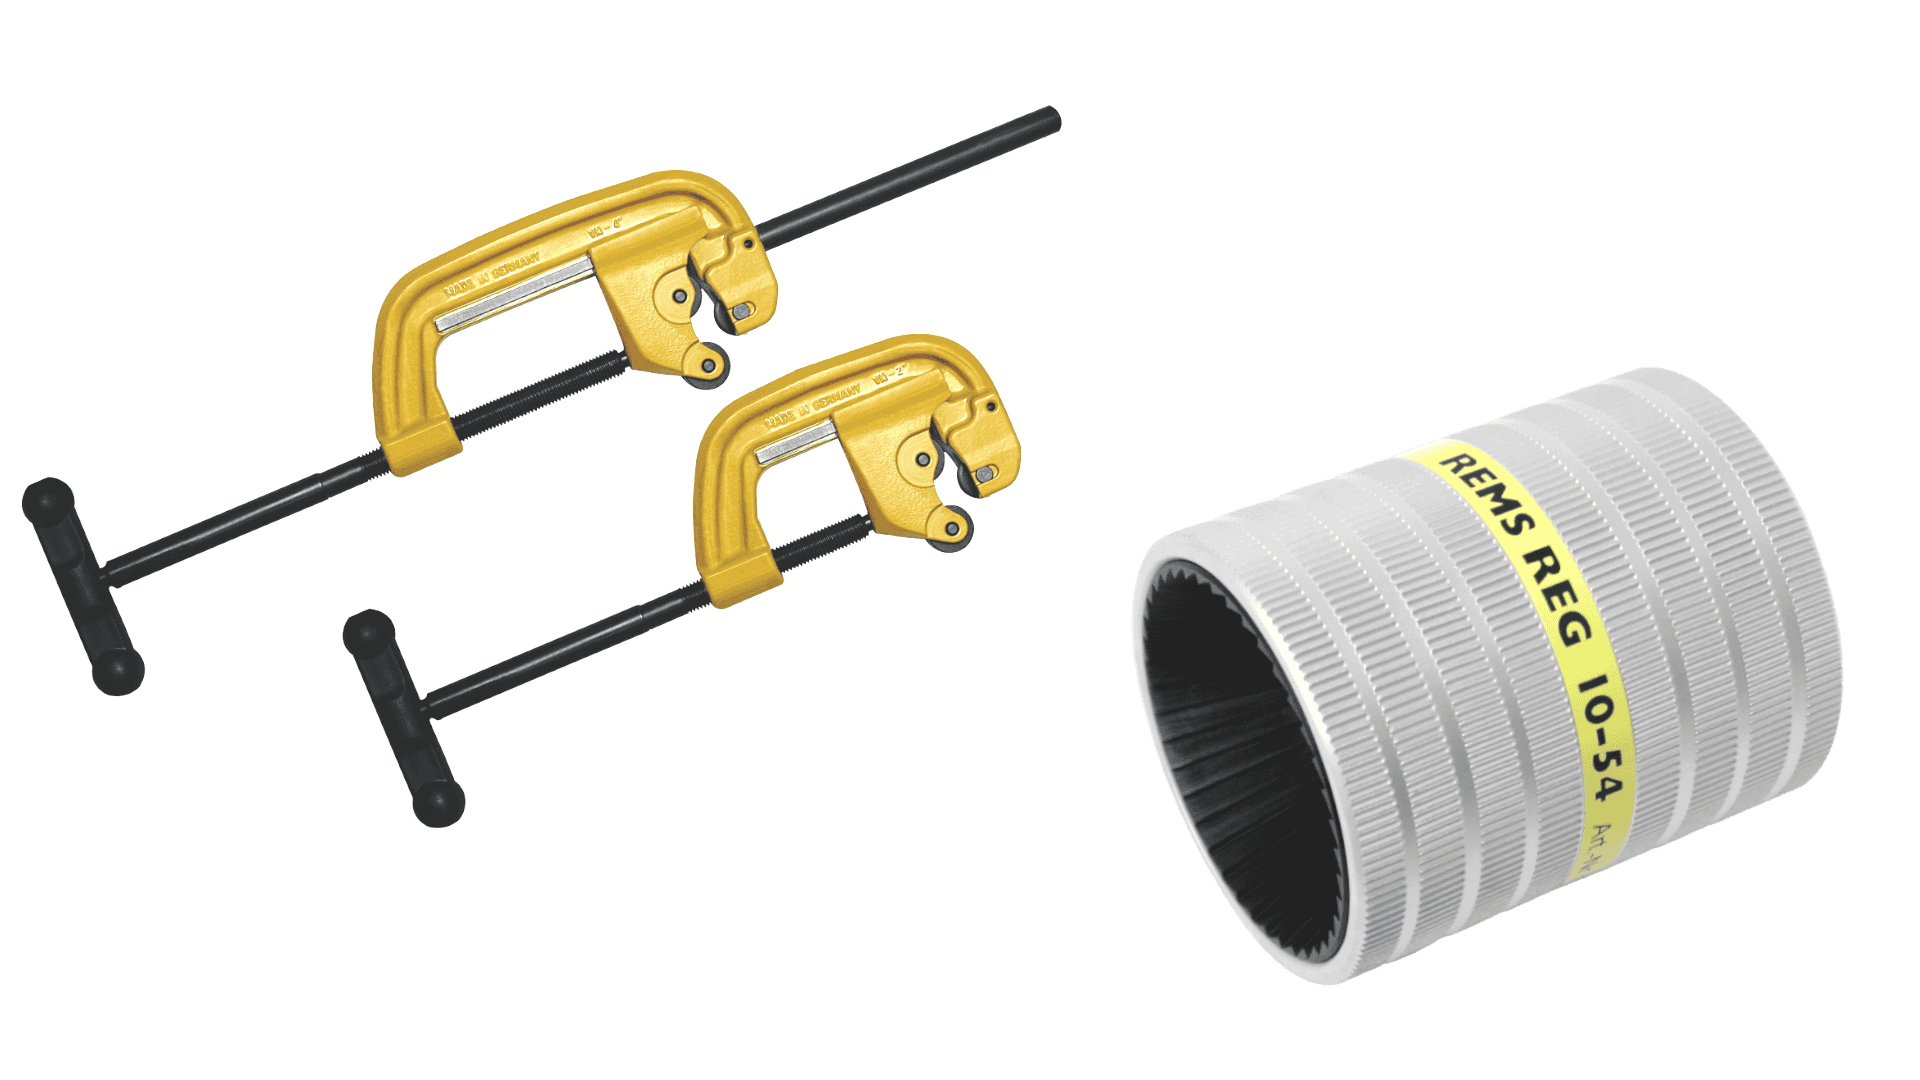 KAN-therm - REMS system - Tools for pipe processing